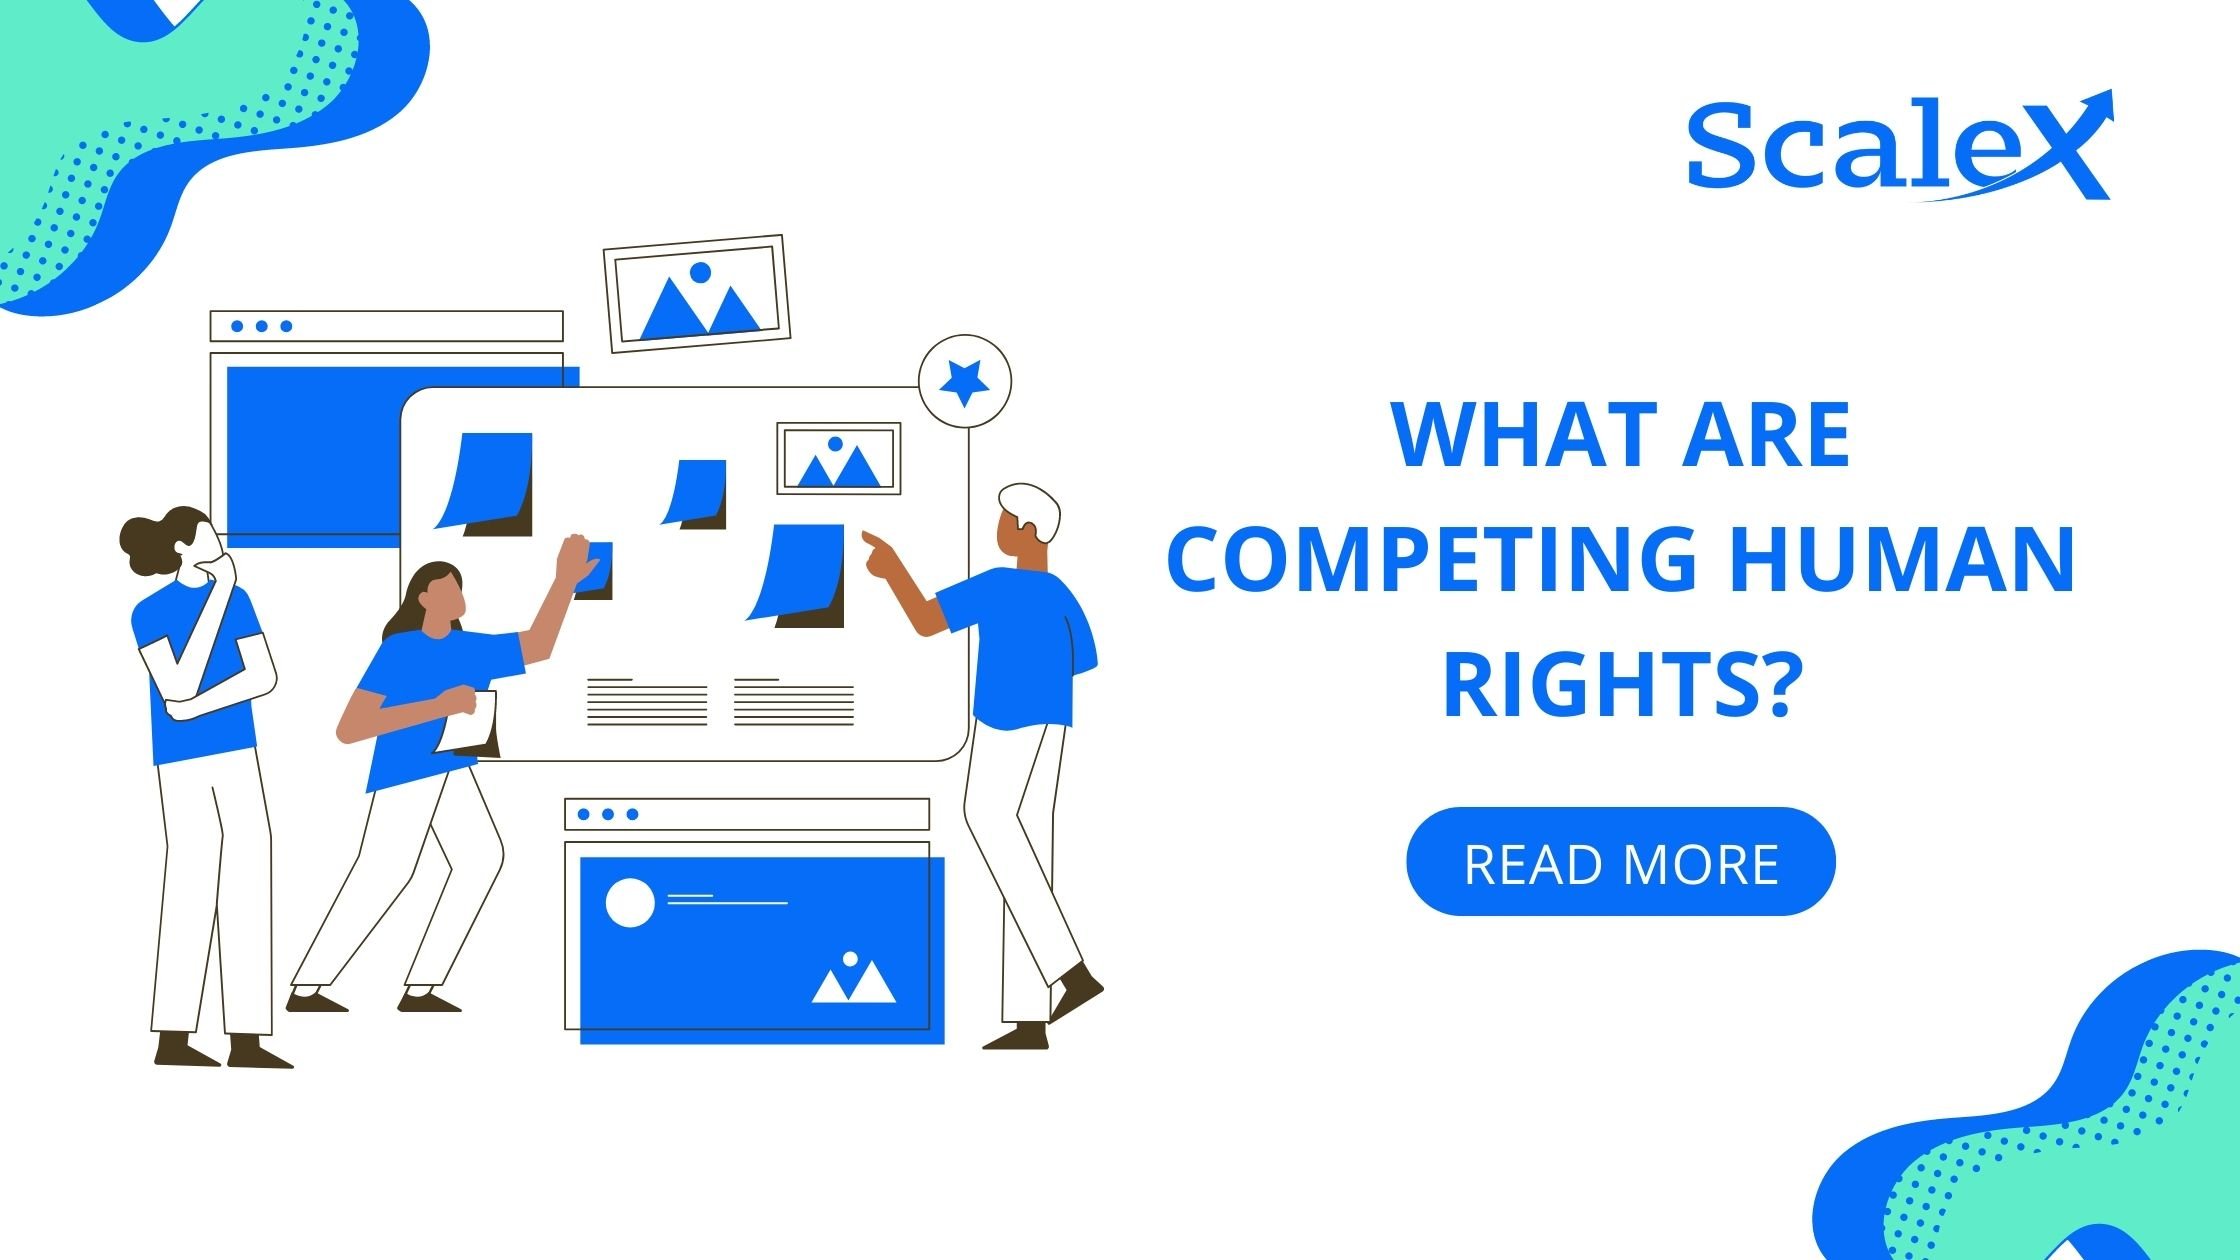 What are competing human rights?